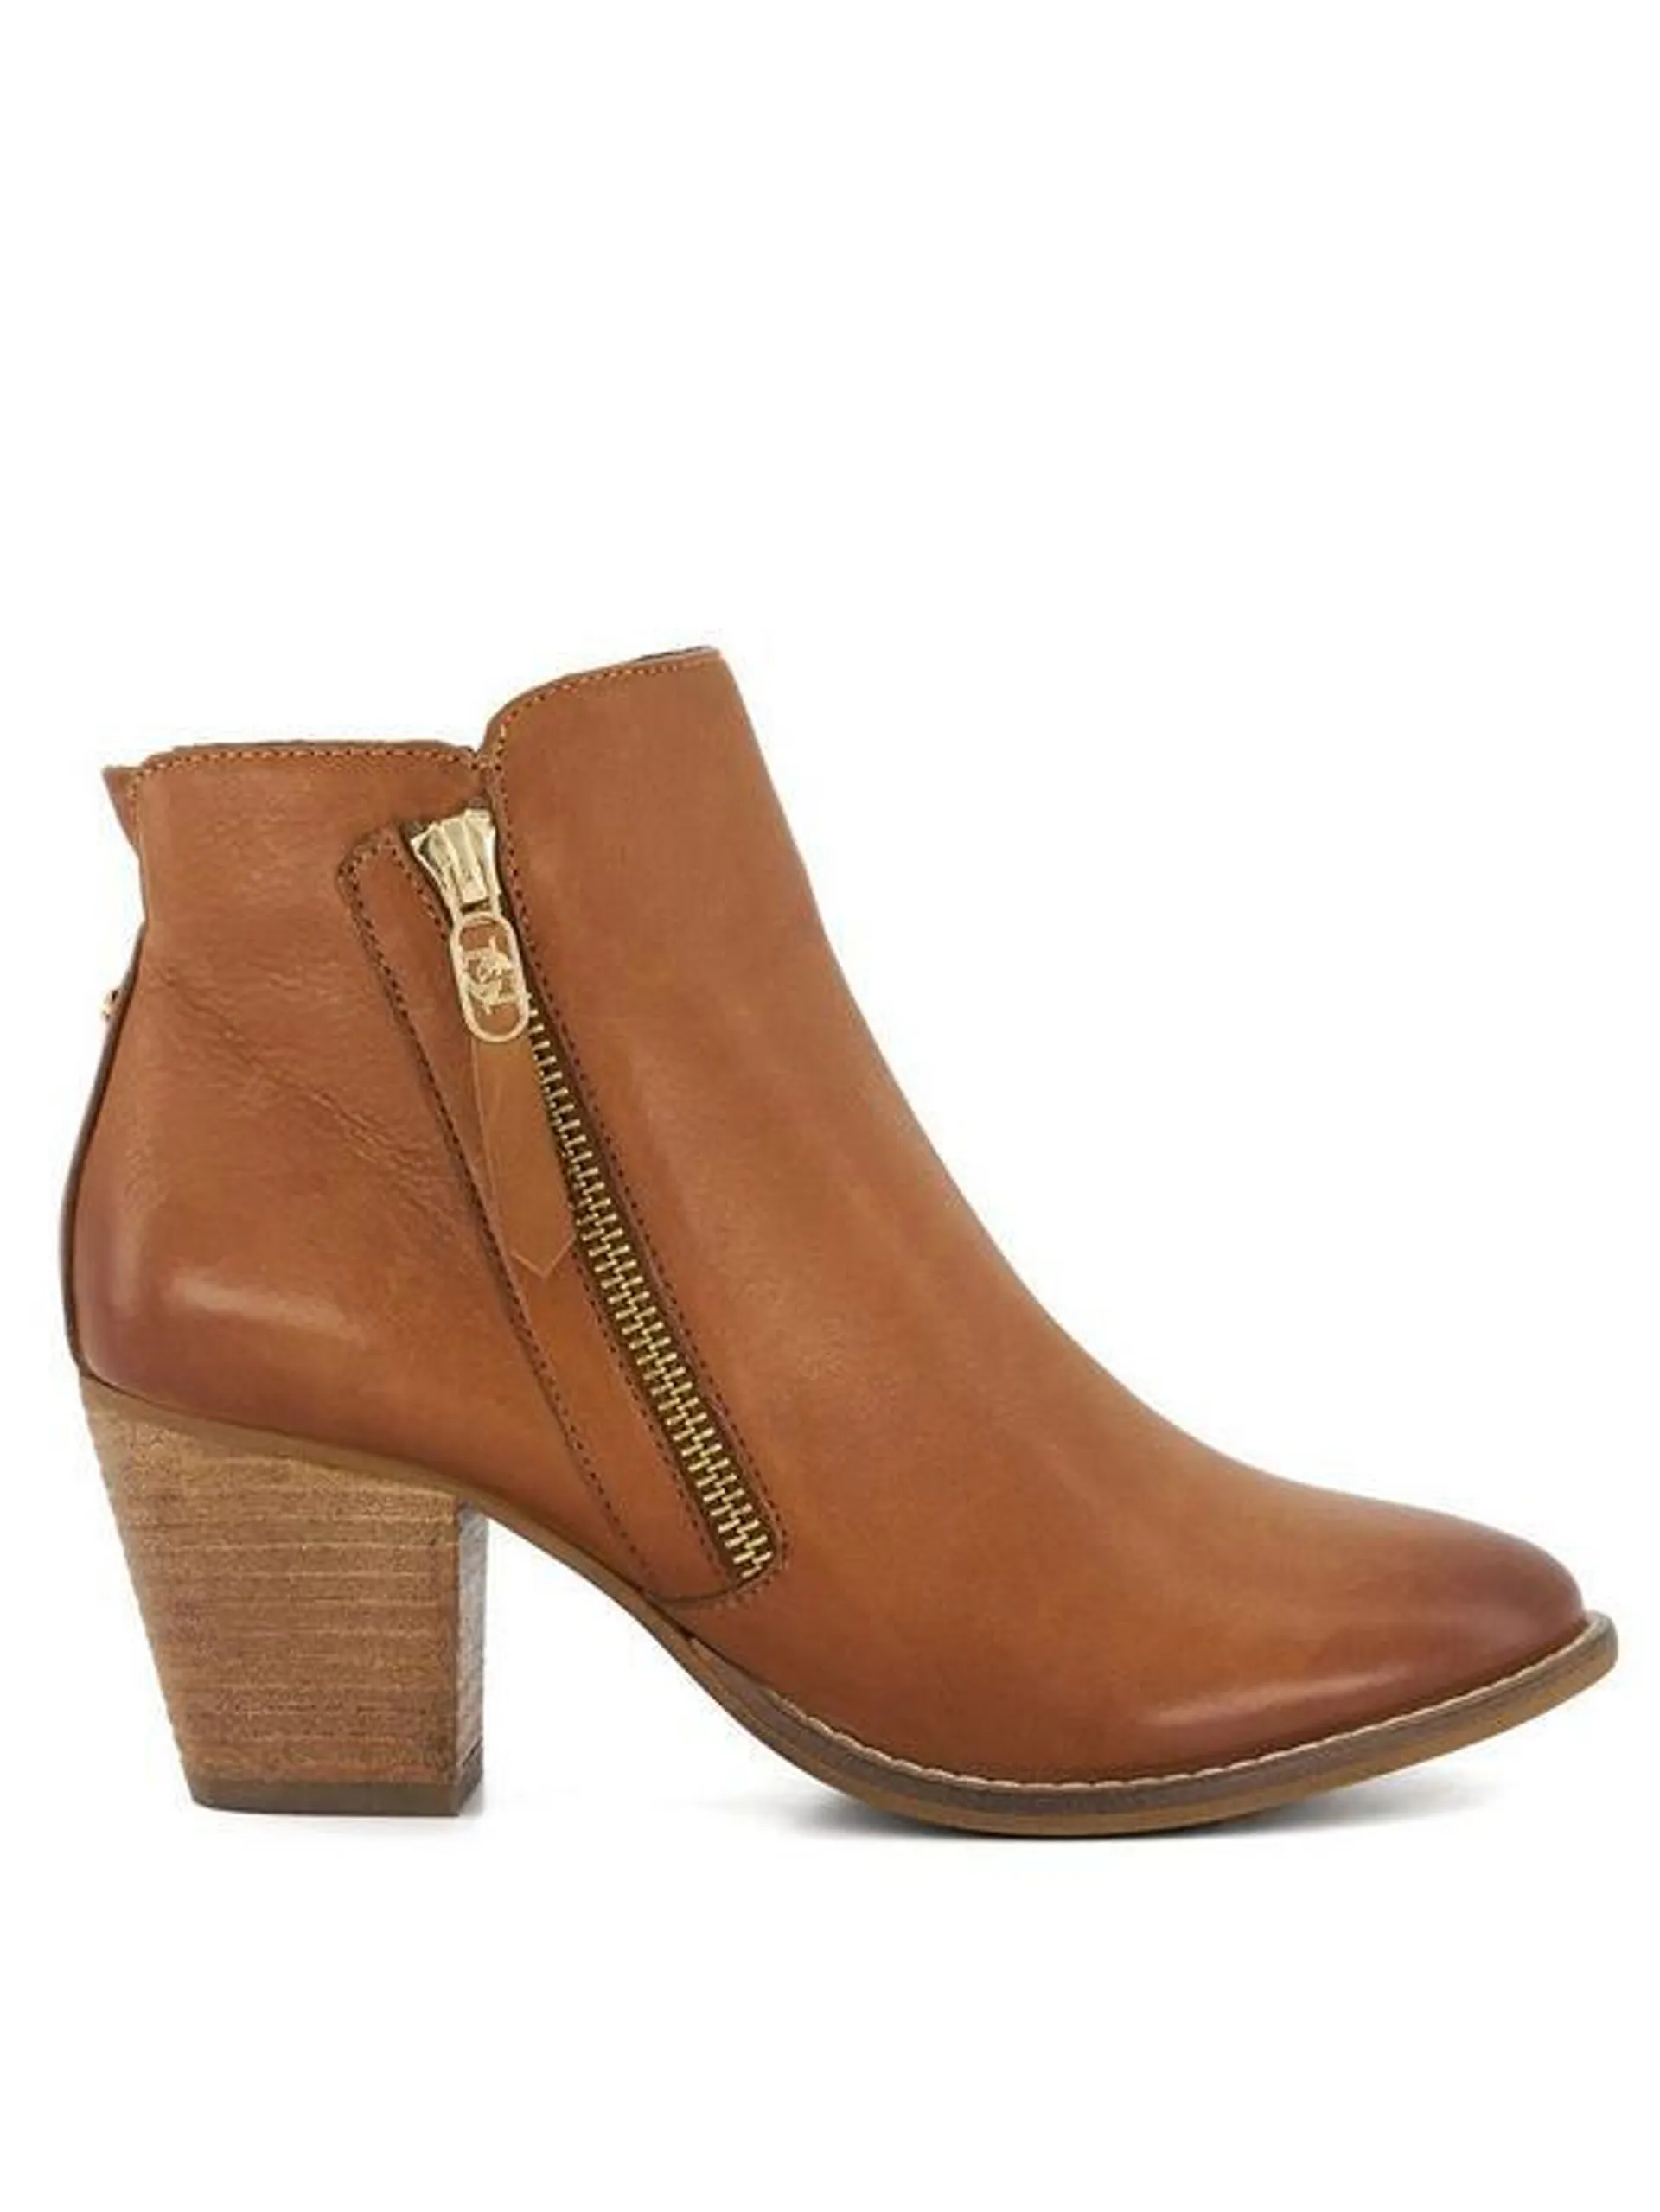 Dune Paicey Mid Block Leather Heel Ankle Boots - Tan